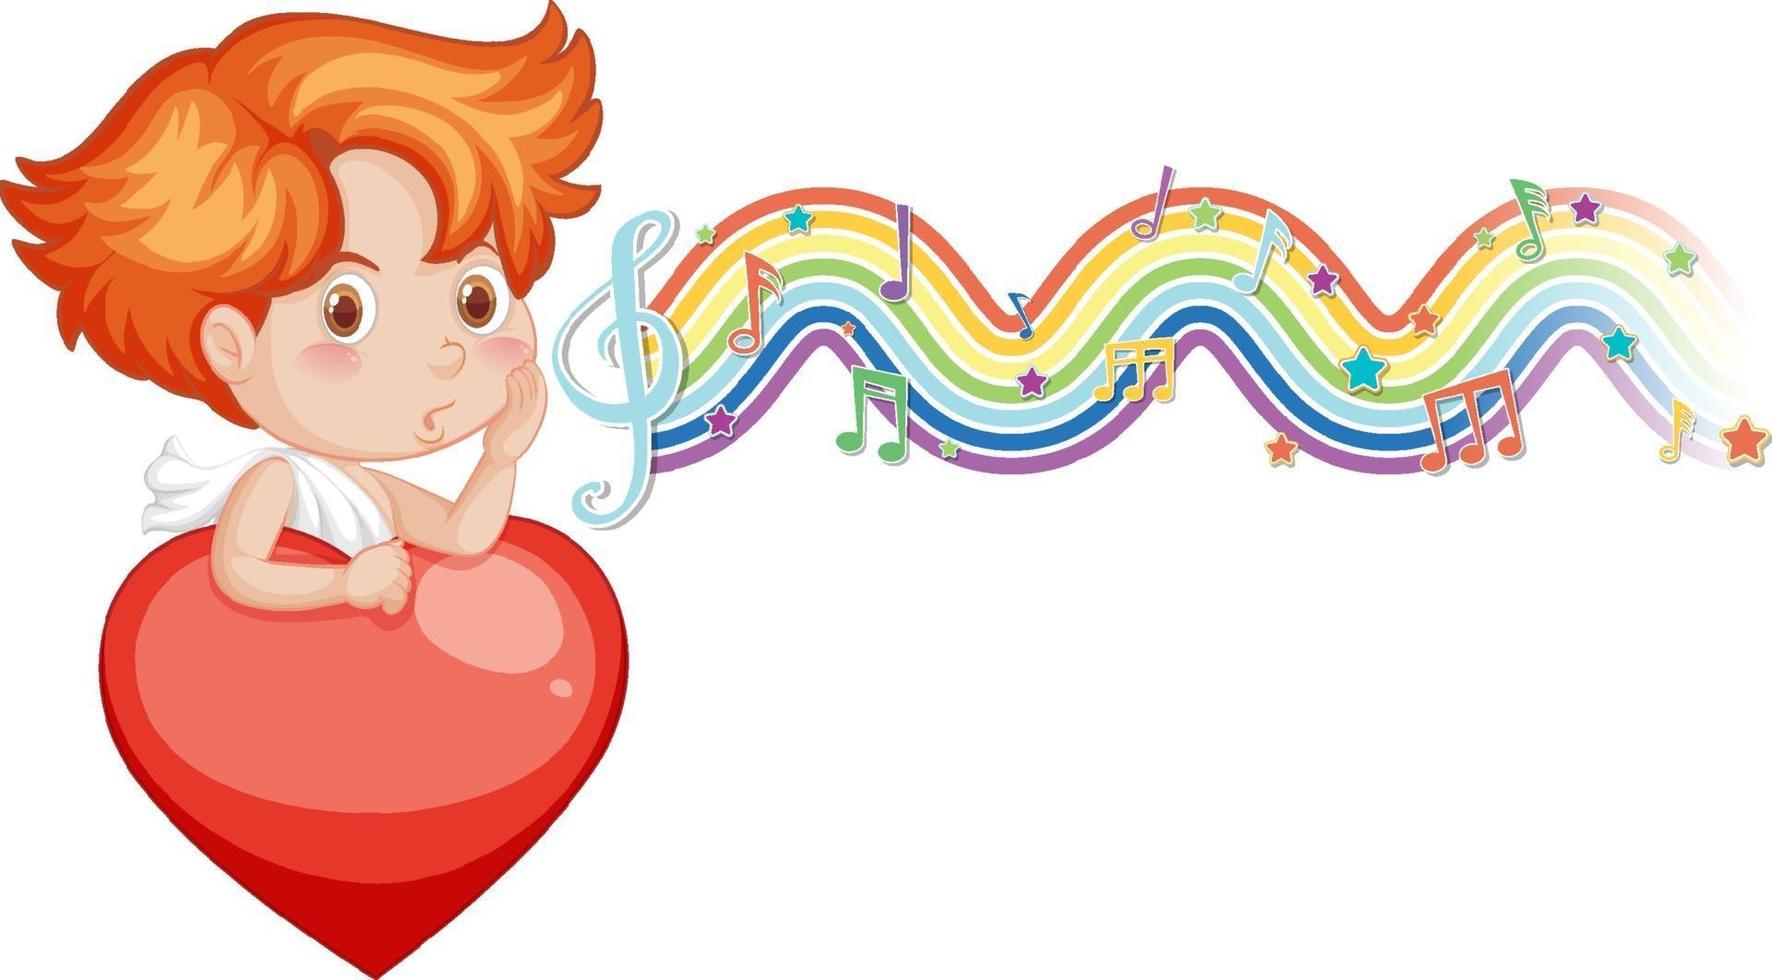 Cupid boy holding heart with melody symbols on rainbow wave vector